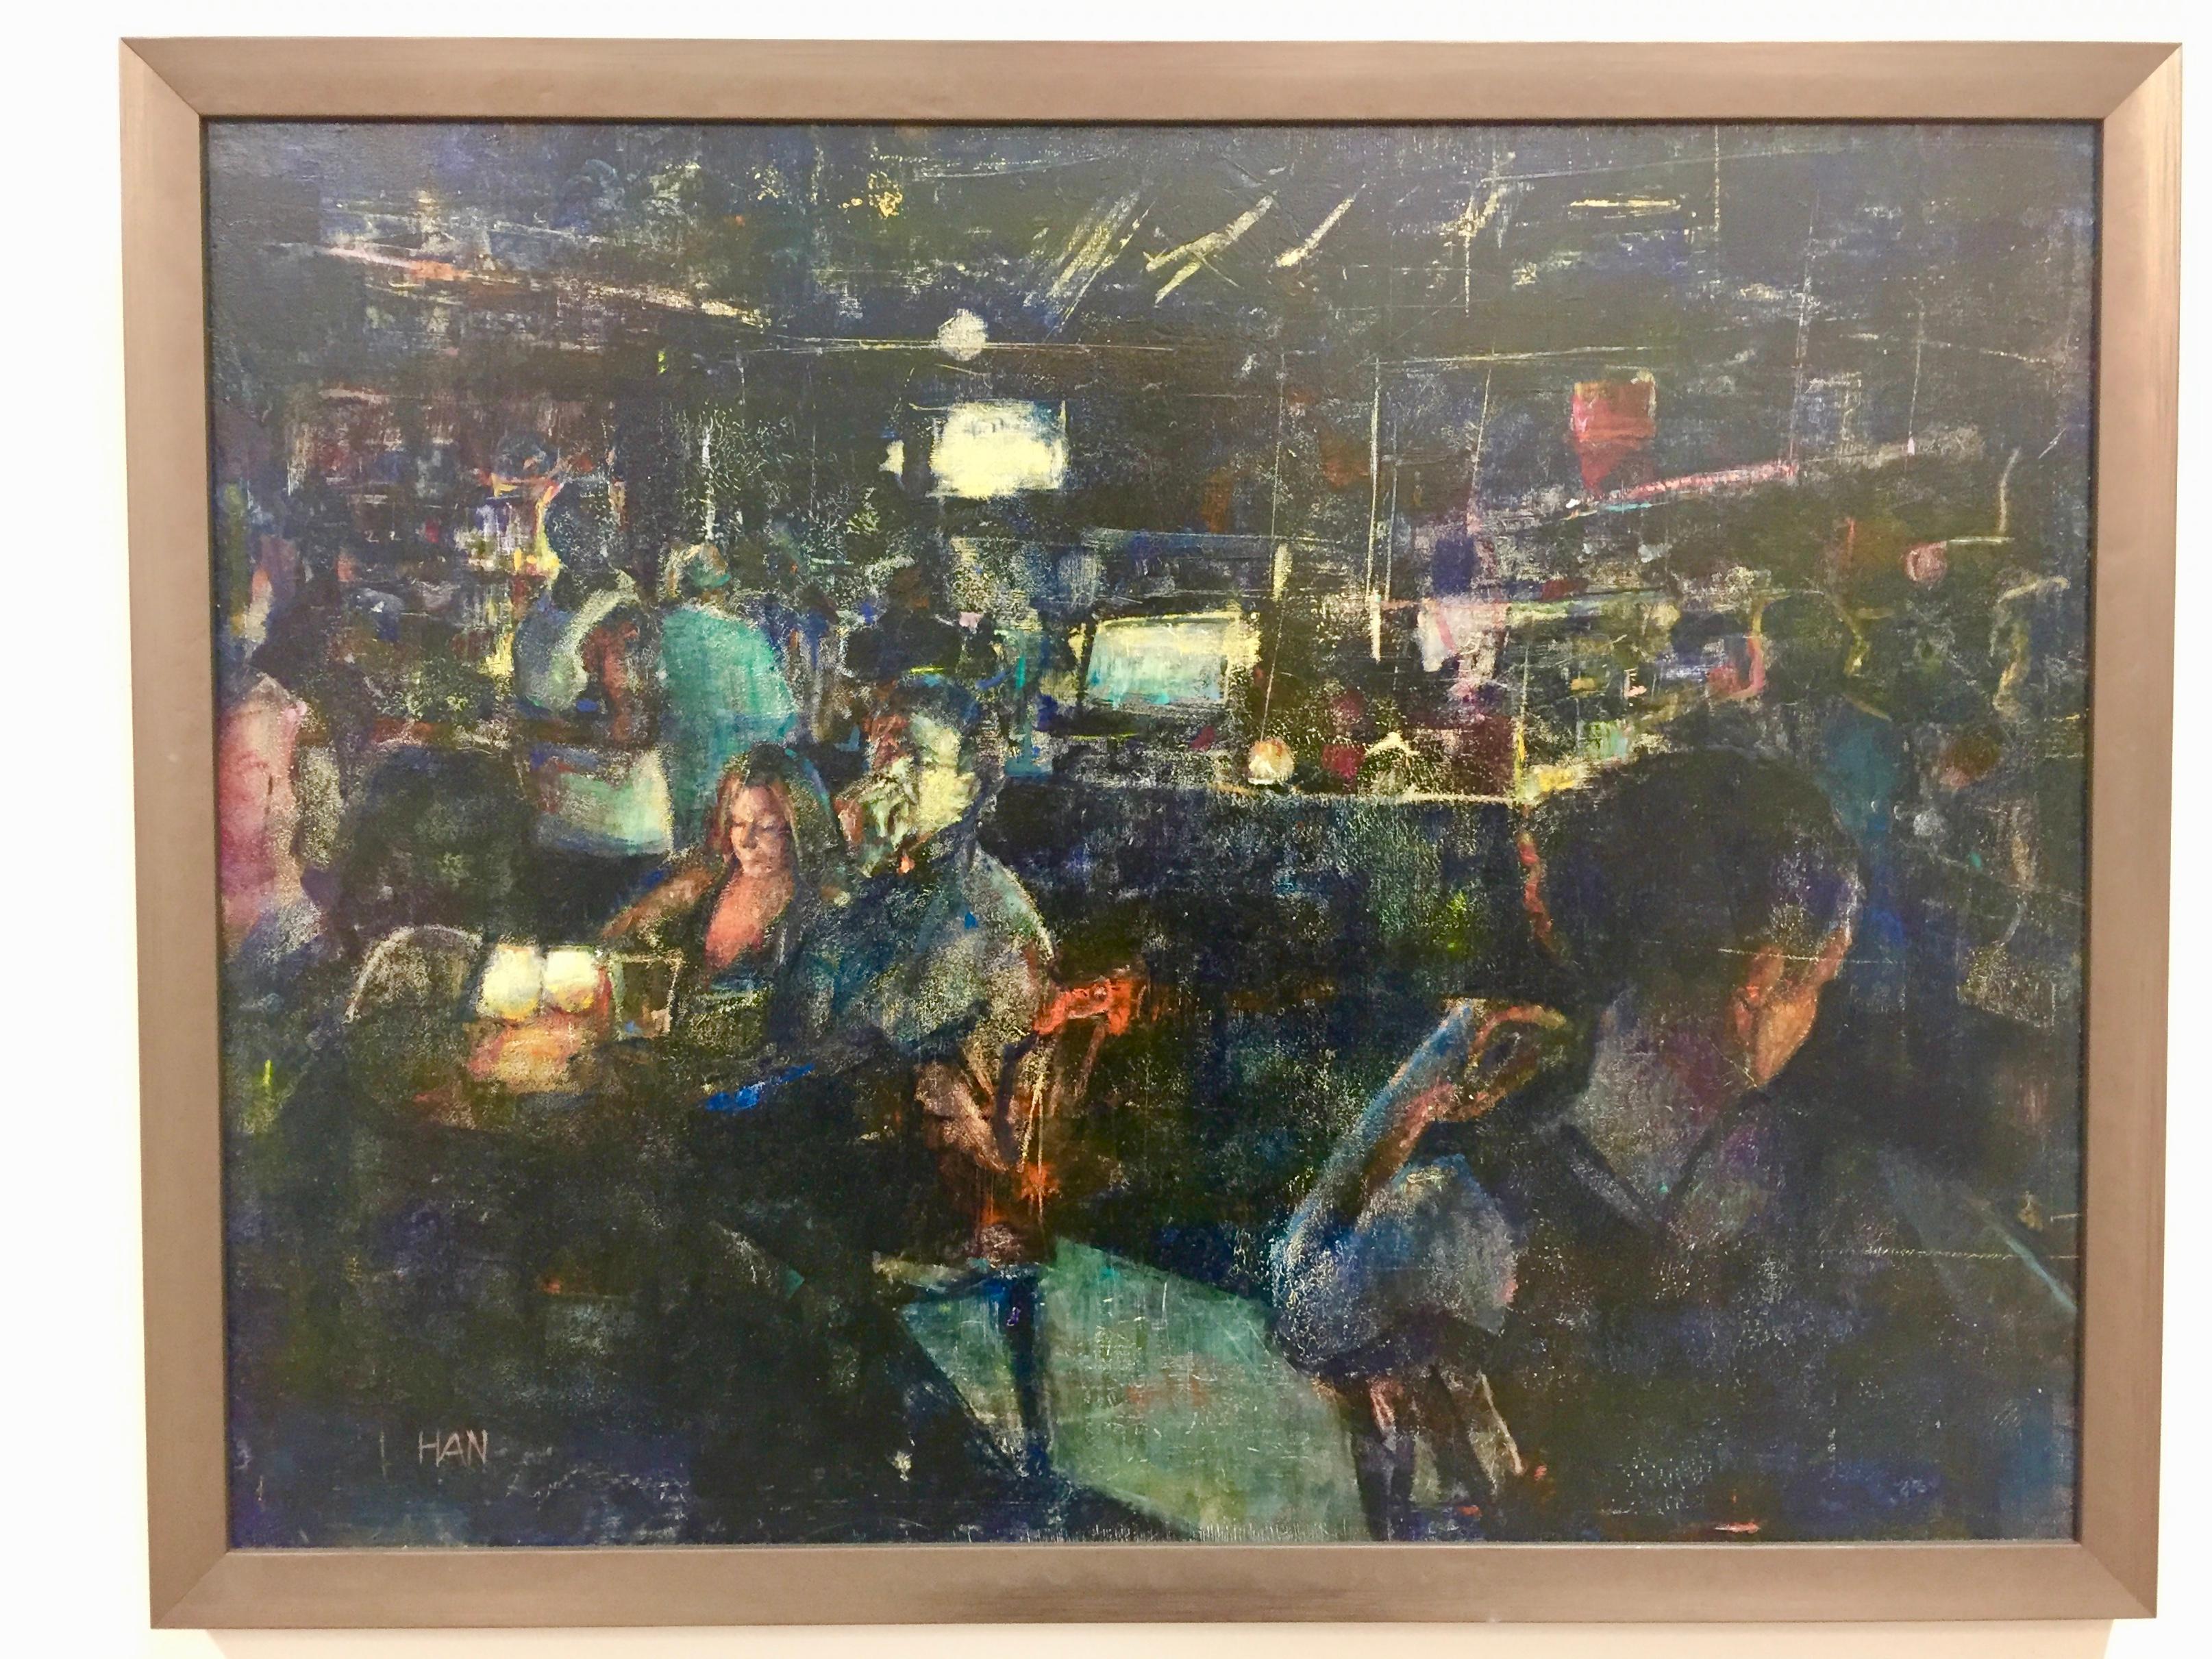 Desire- 21st Century Contemporary Painting of a Café Interior with People 2